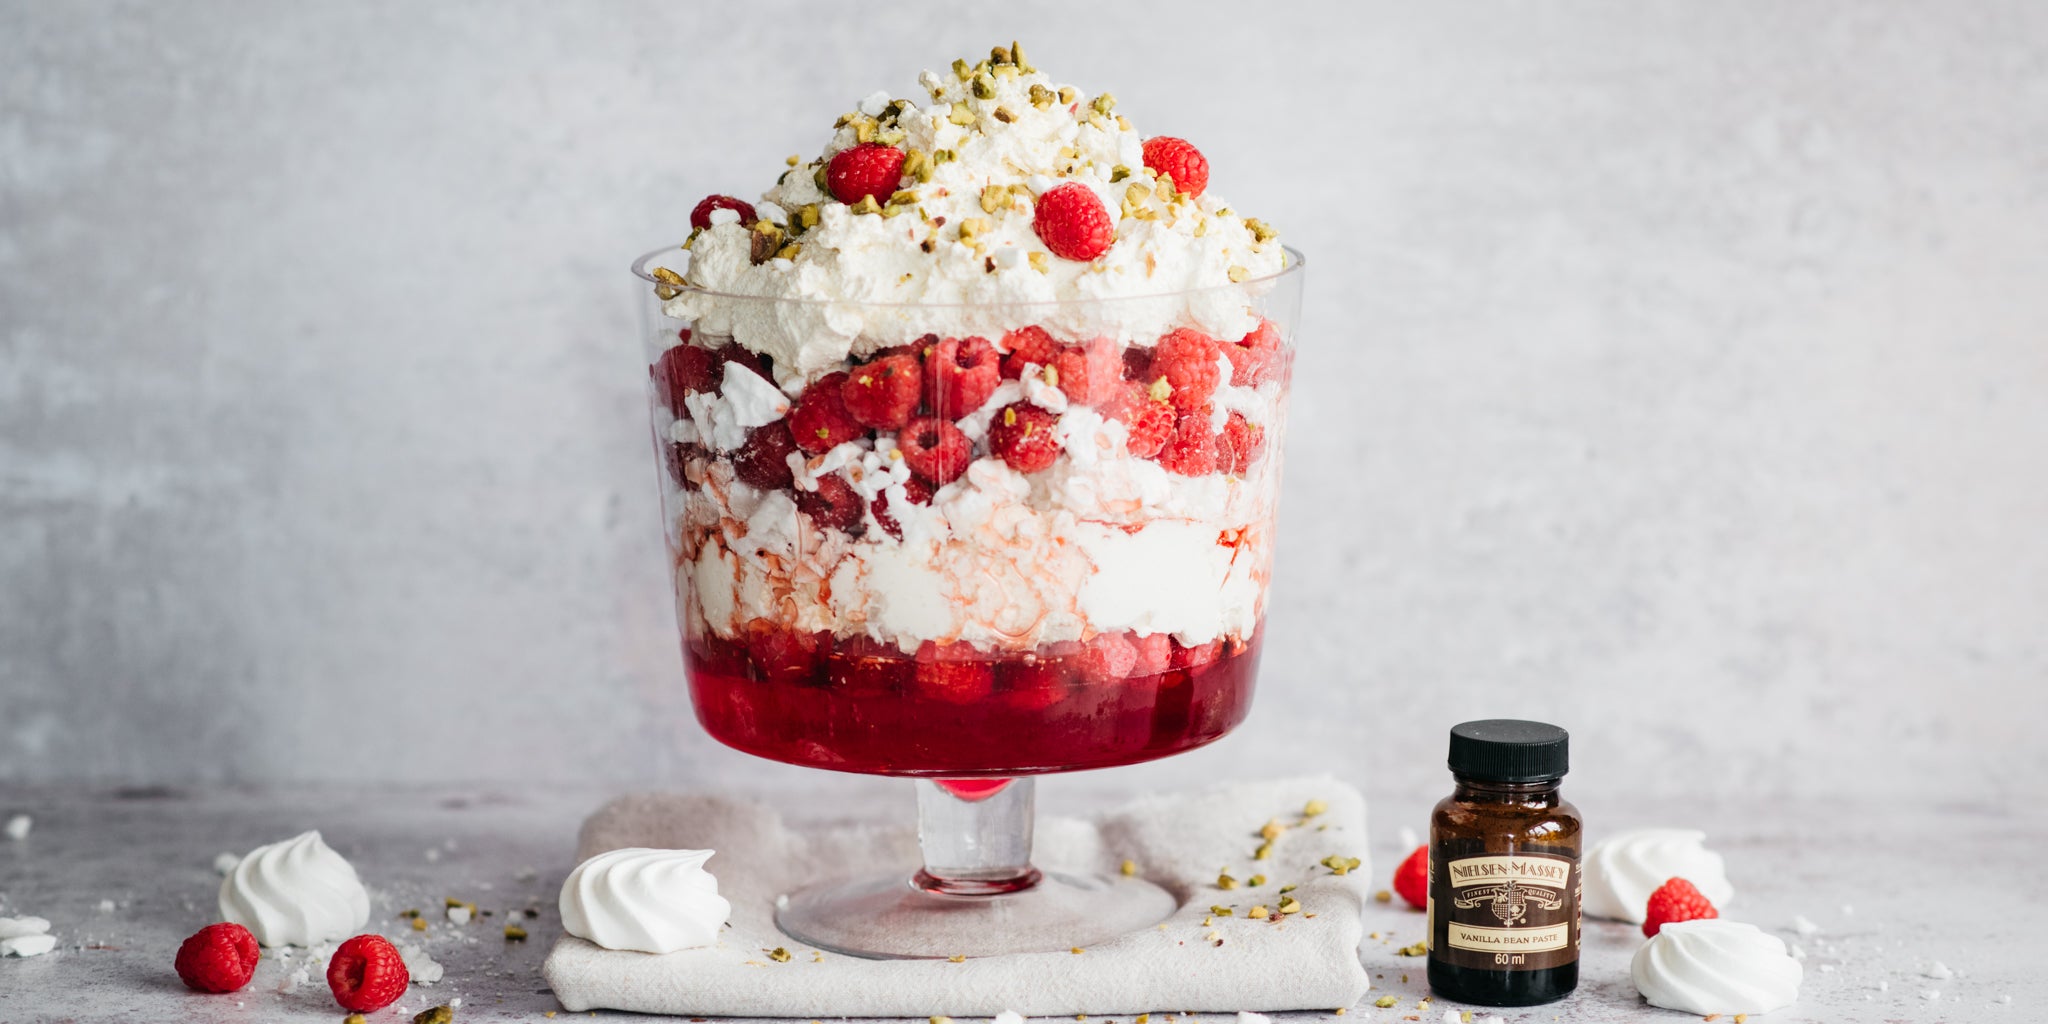 Eton Mess Trifle next to a bottle of Nielsen-Massey vanilla paste and scattered crumbs of meringue and chopped nuts